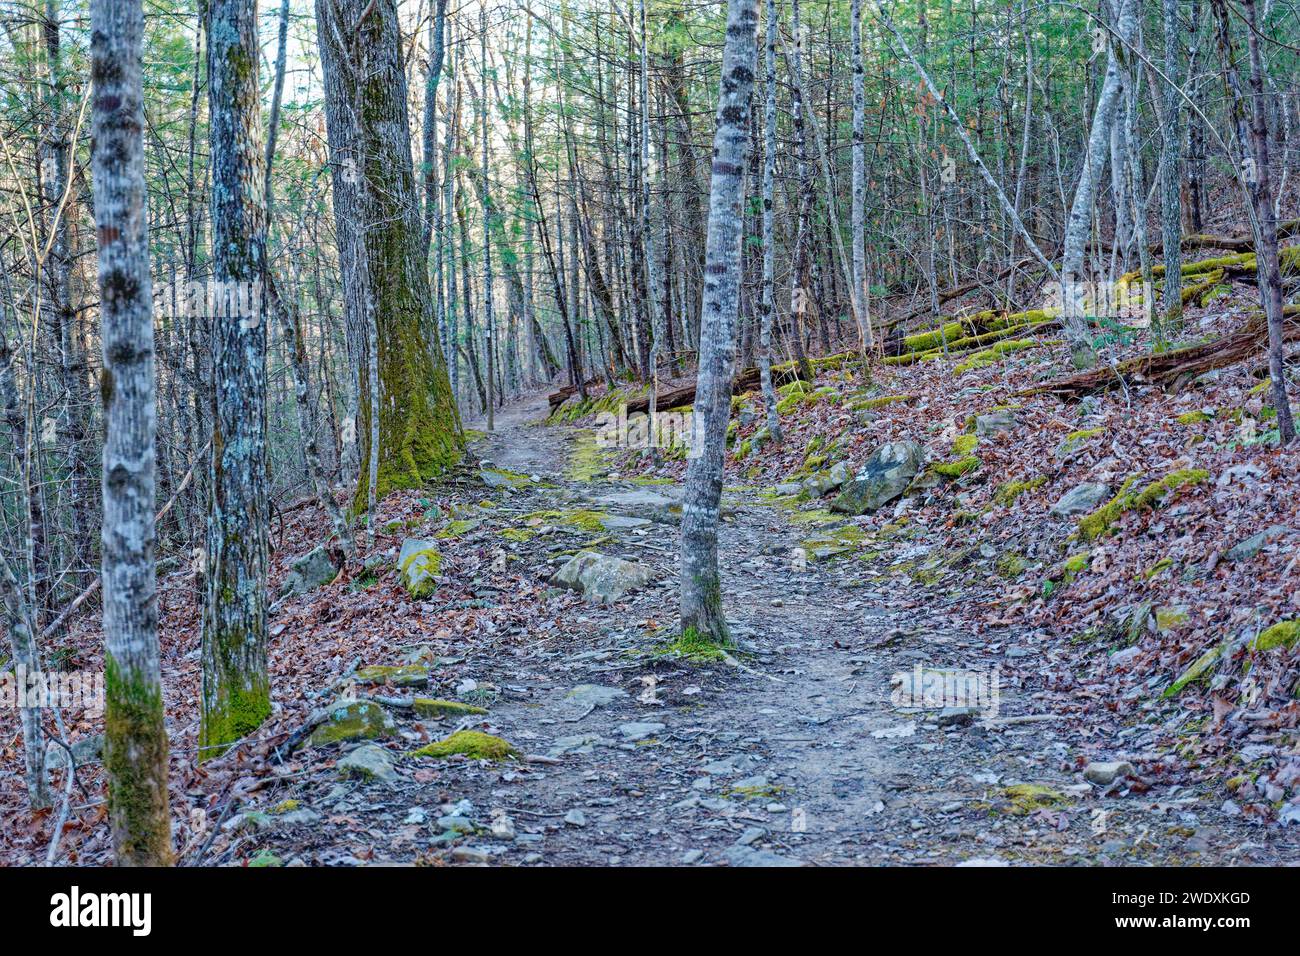 A small tree growing in the middle of a rocky trail in the mountains in a forest the path going around both sides of the tree in late wintertime Stock Photo